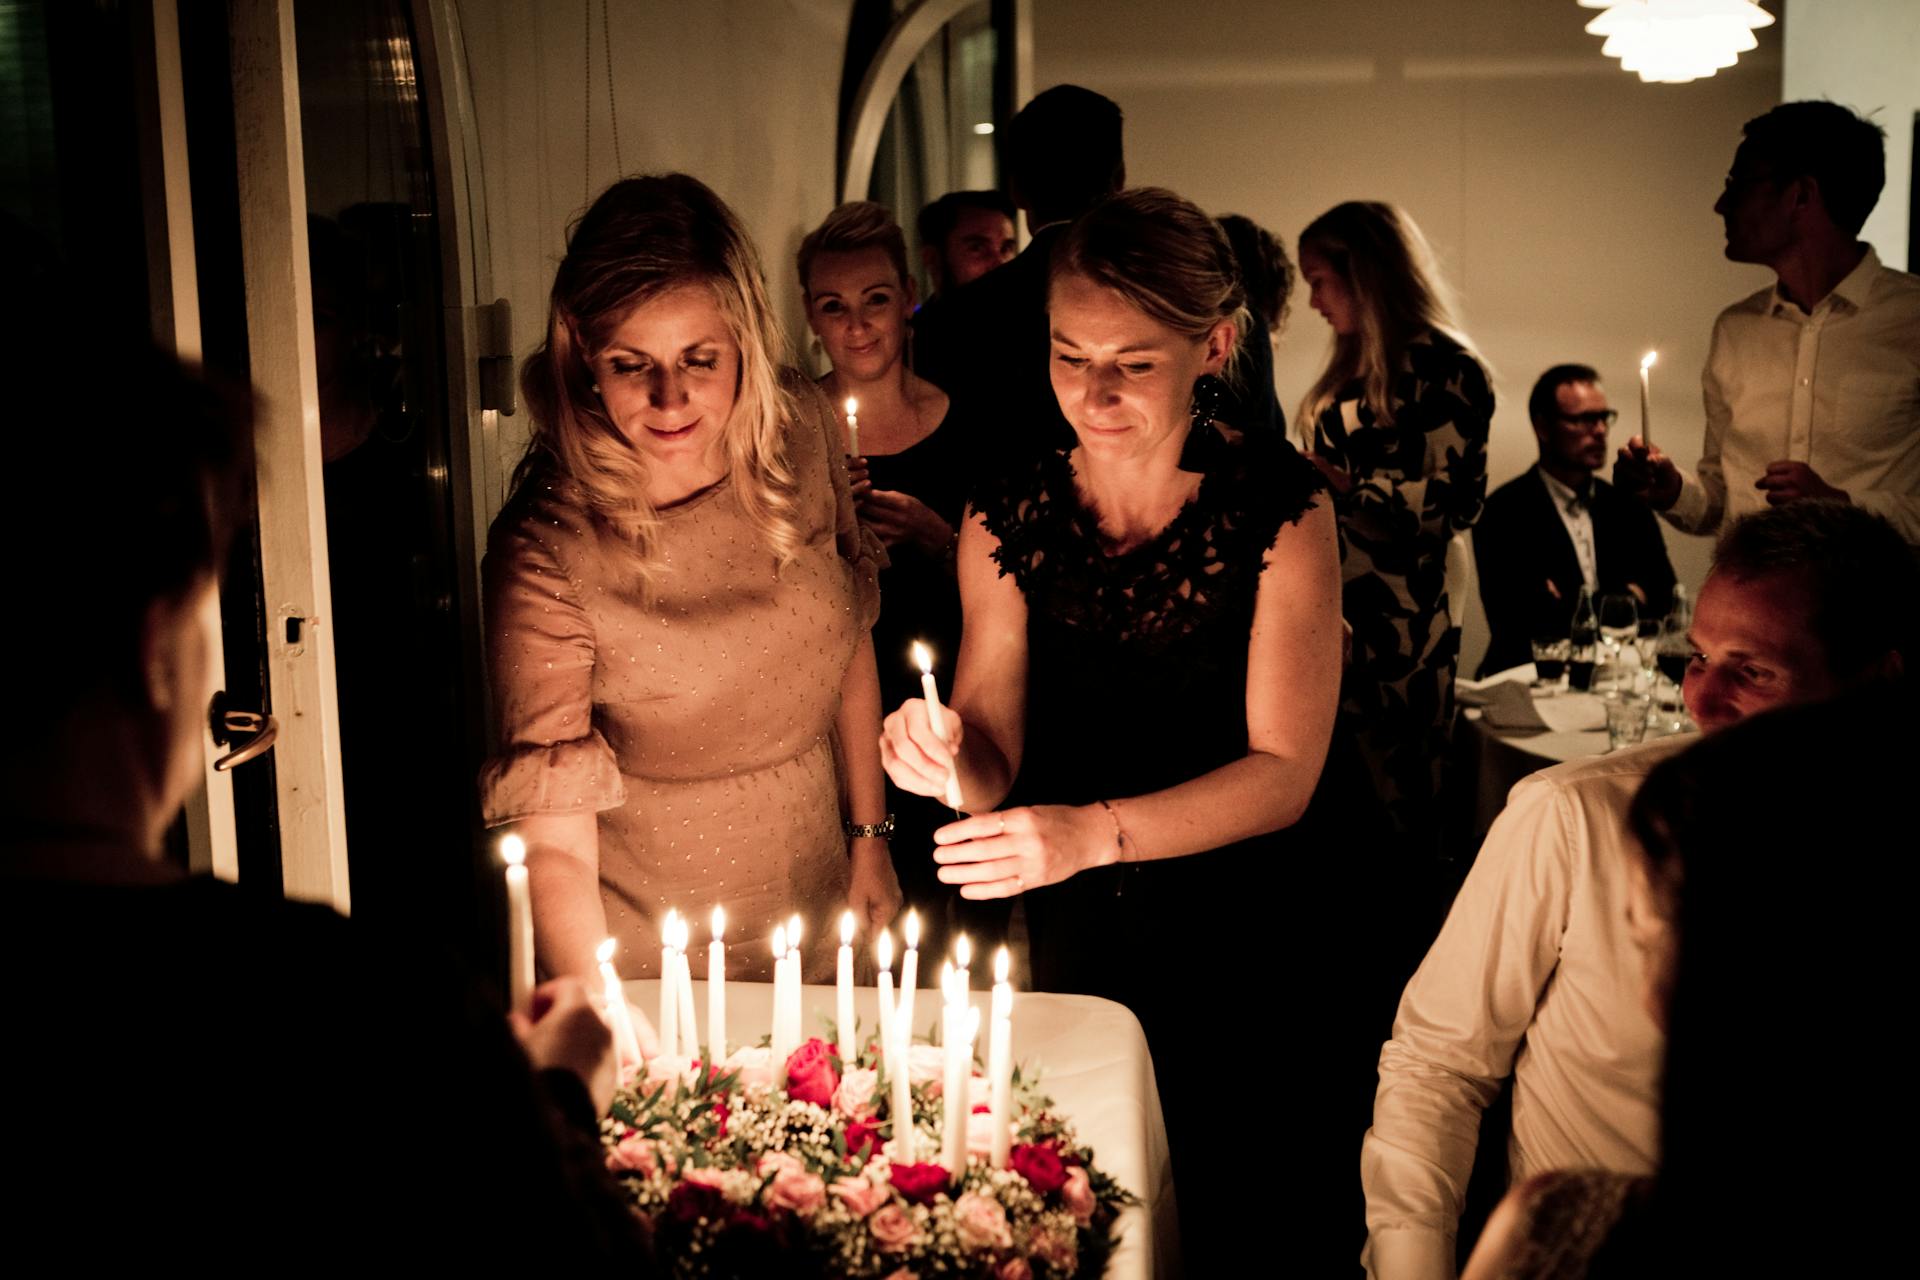 Two women holding candles at a birthday party | Source: Pexels